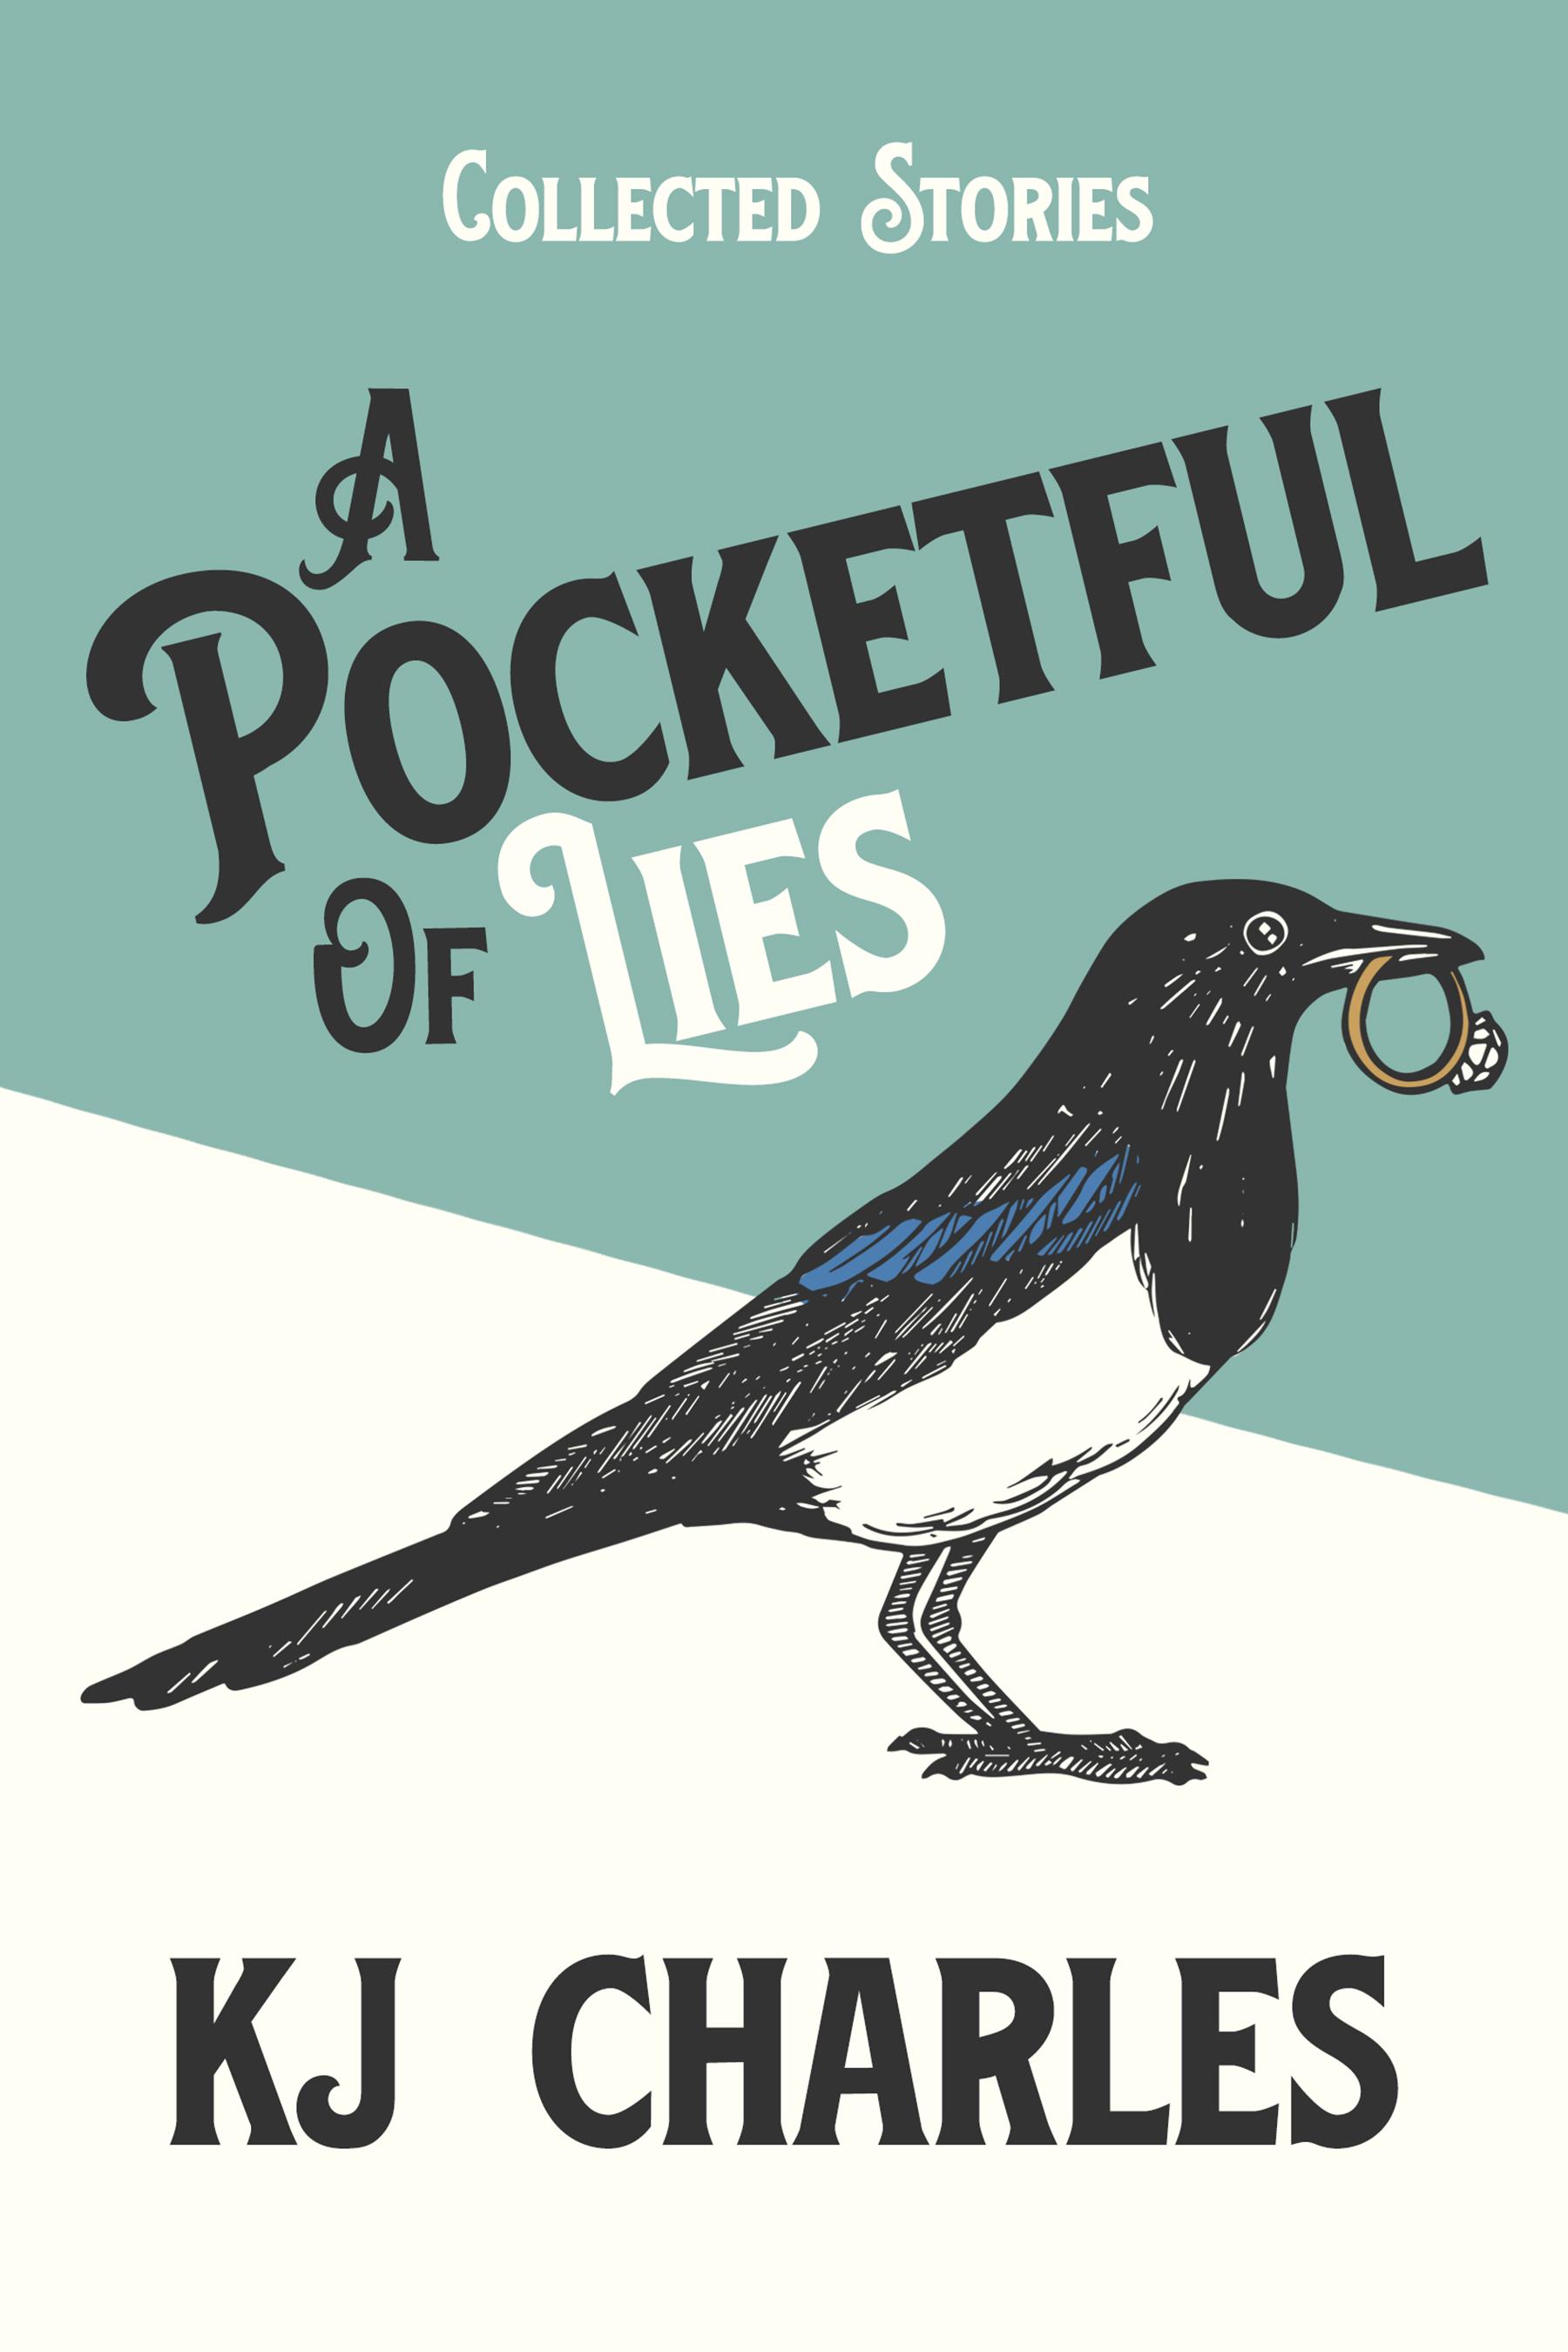 A Pocketful of Lies: Collected Stories